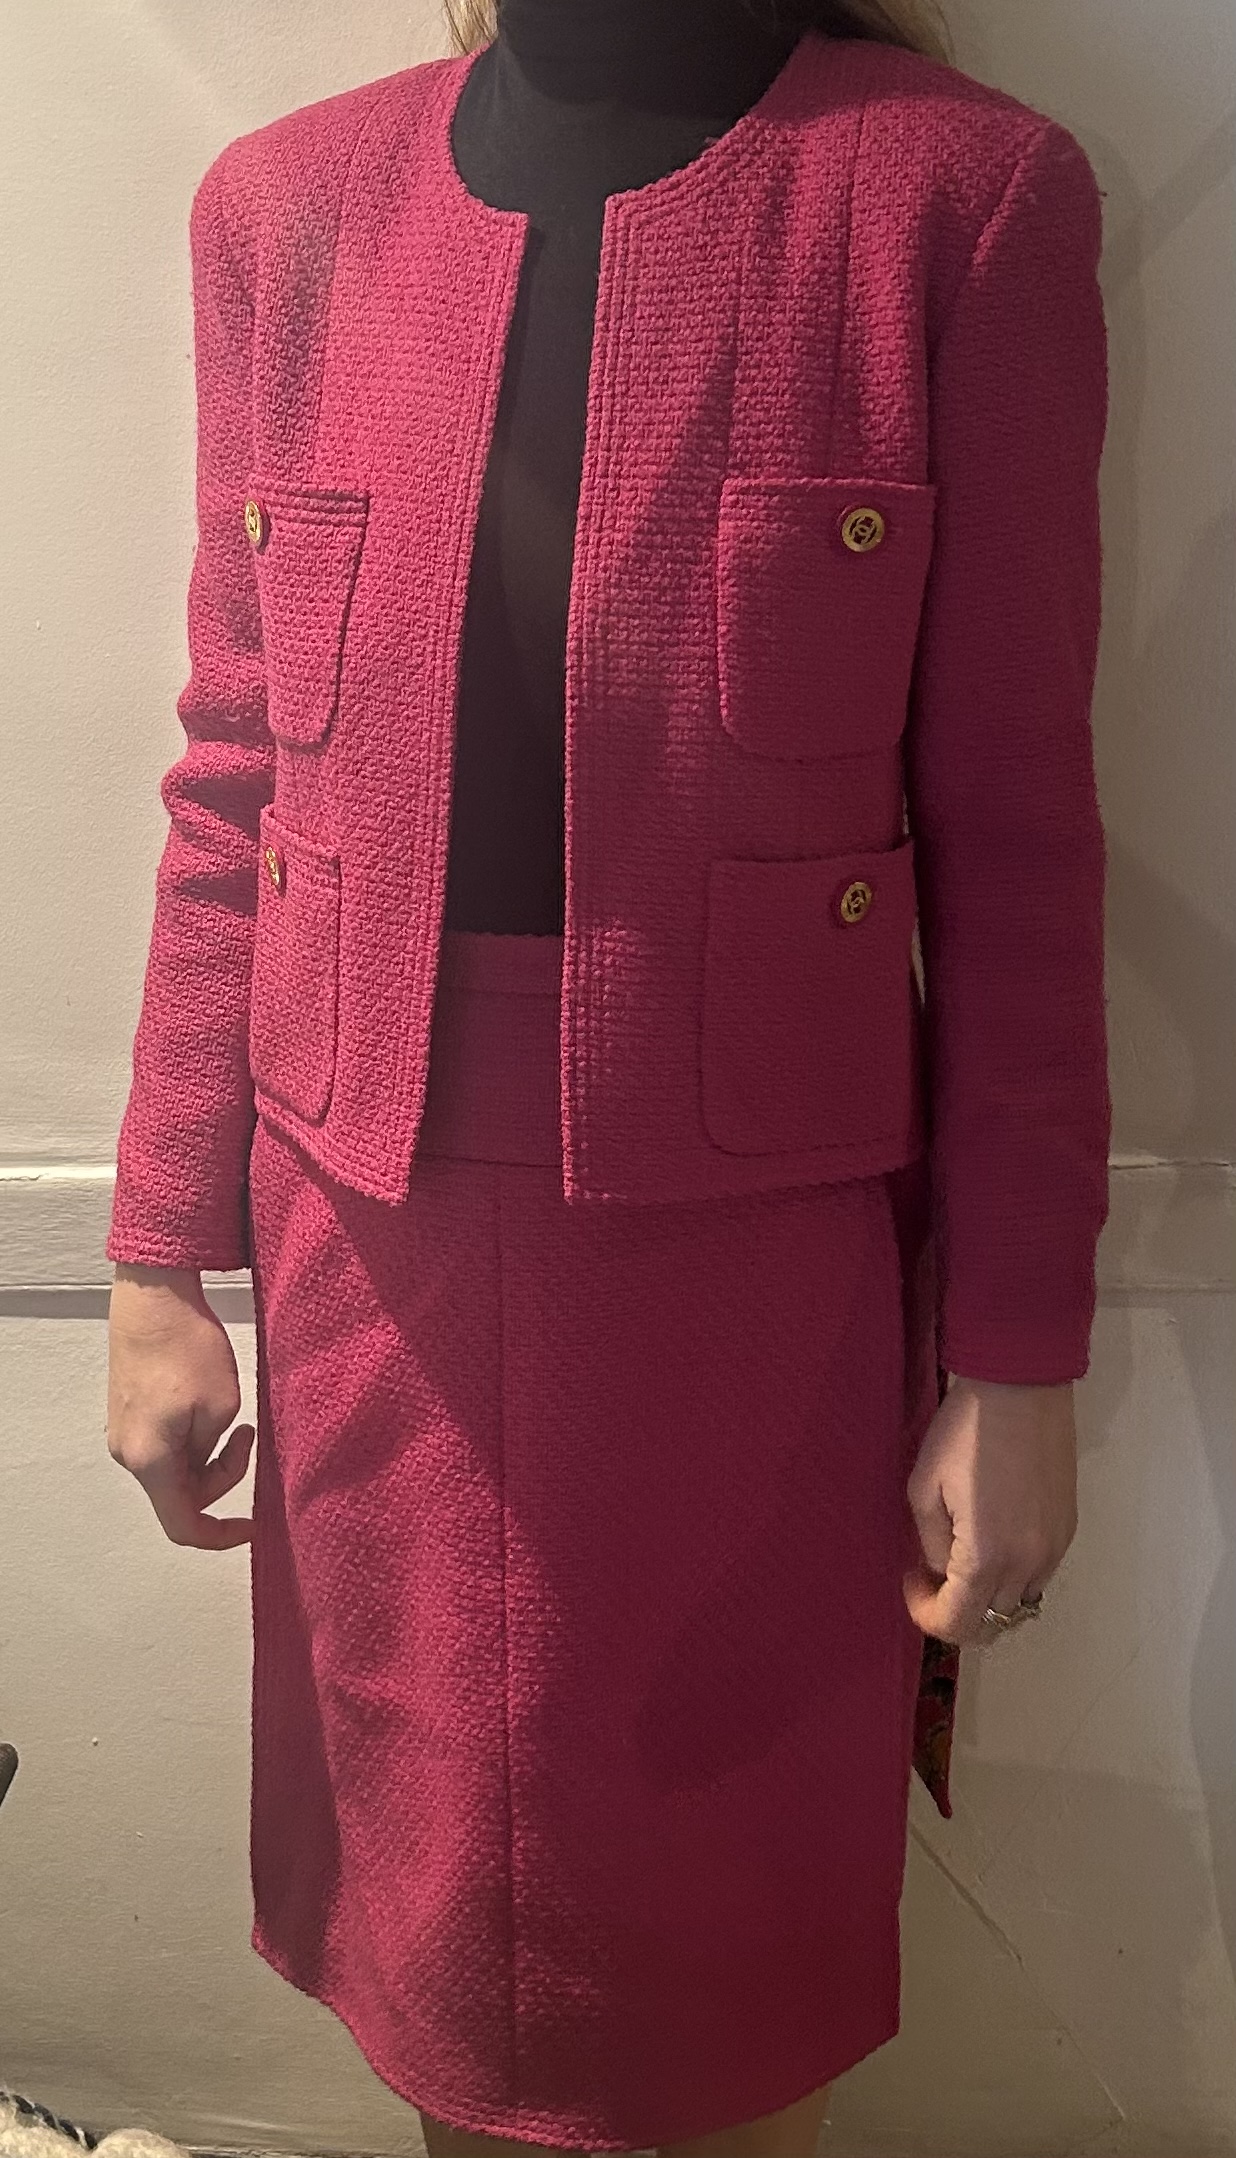 A Chanel Boutique "Hot Pink" two piece boucle suit, the jacket with printed silk lining four